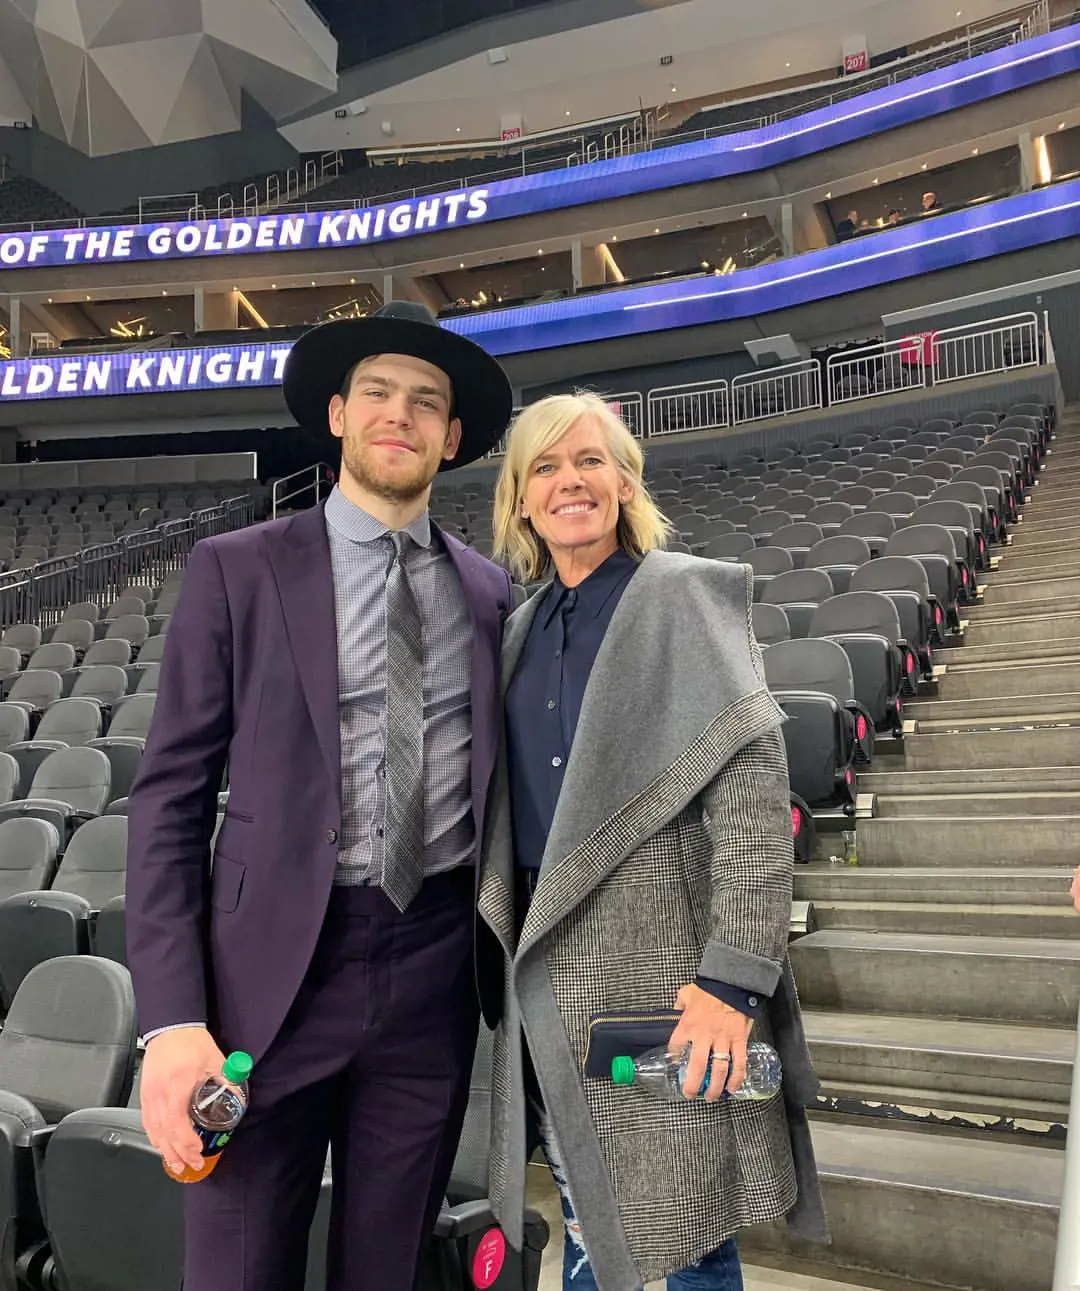 Adam attends the Golden Knights game with Elaine on March, 2019.